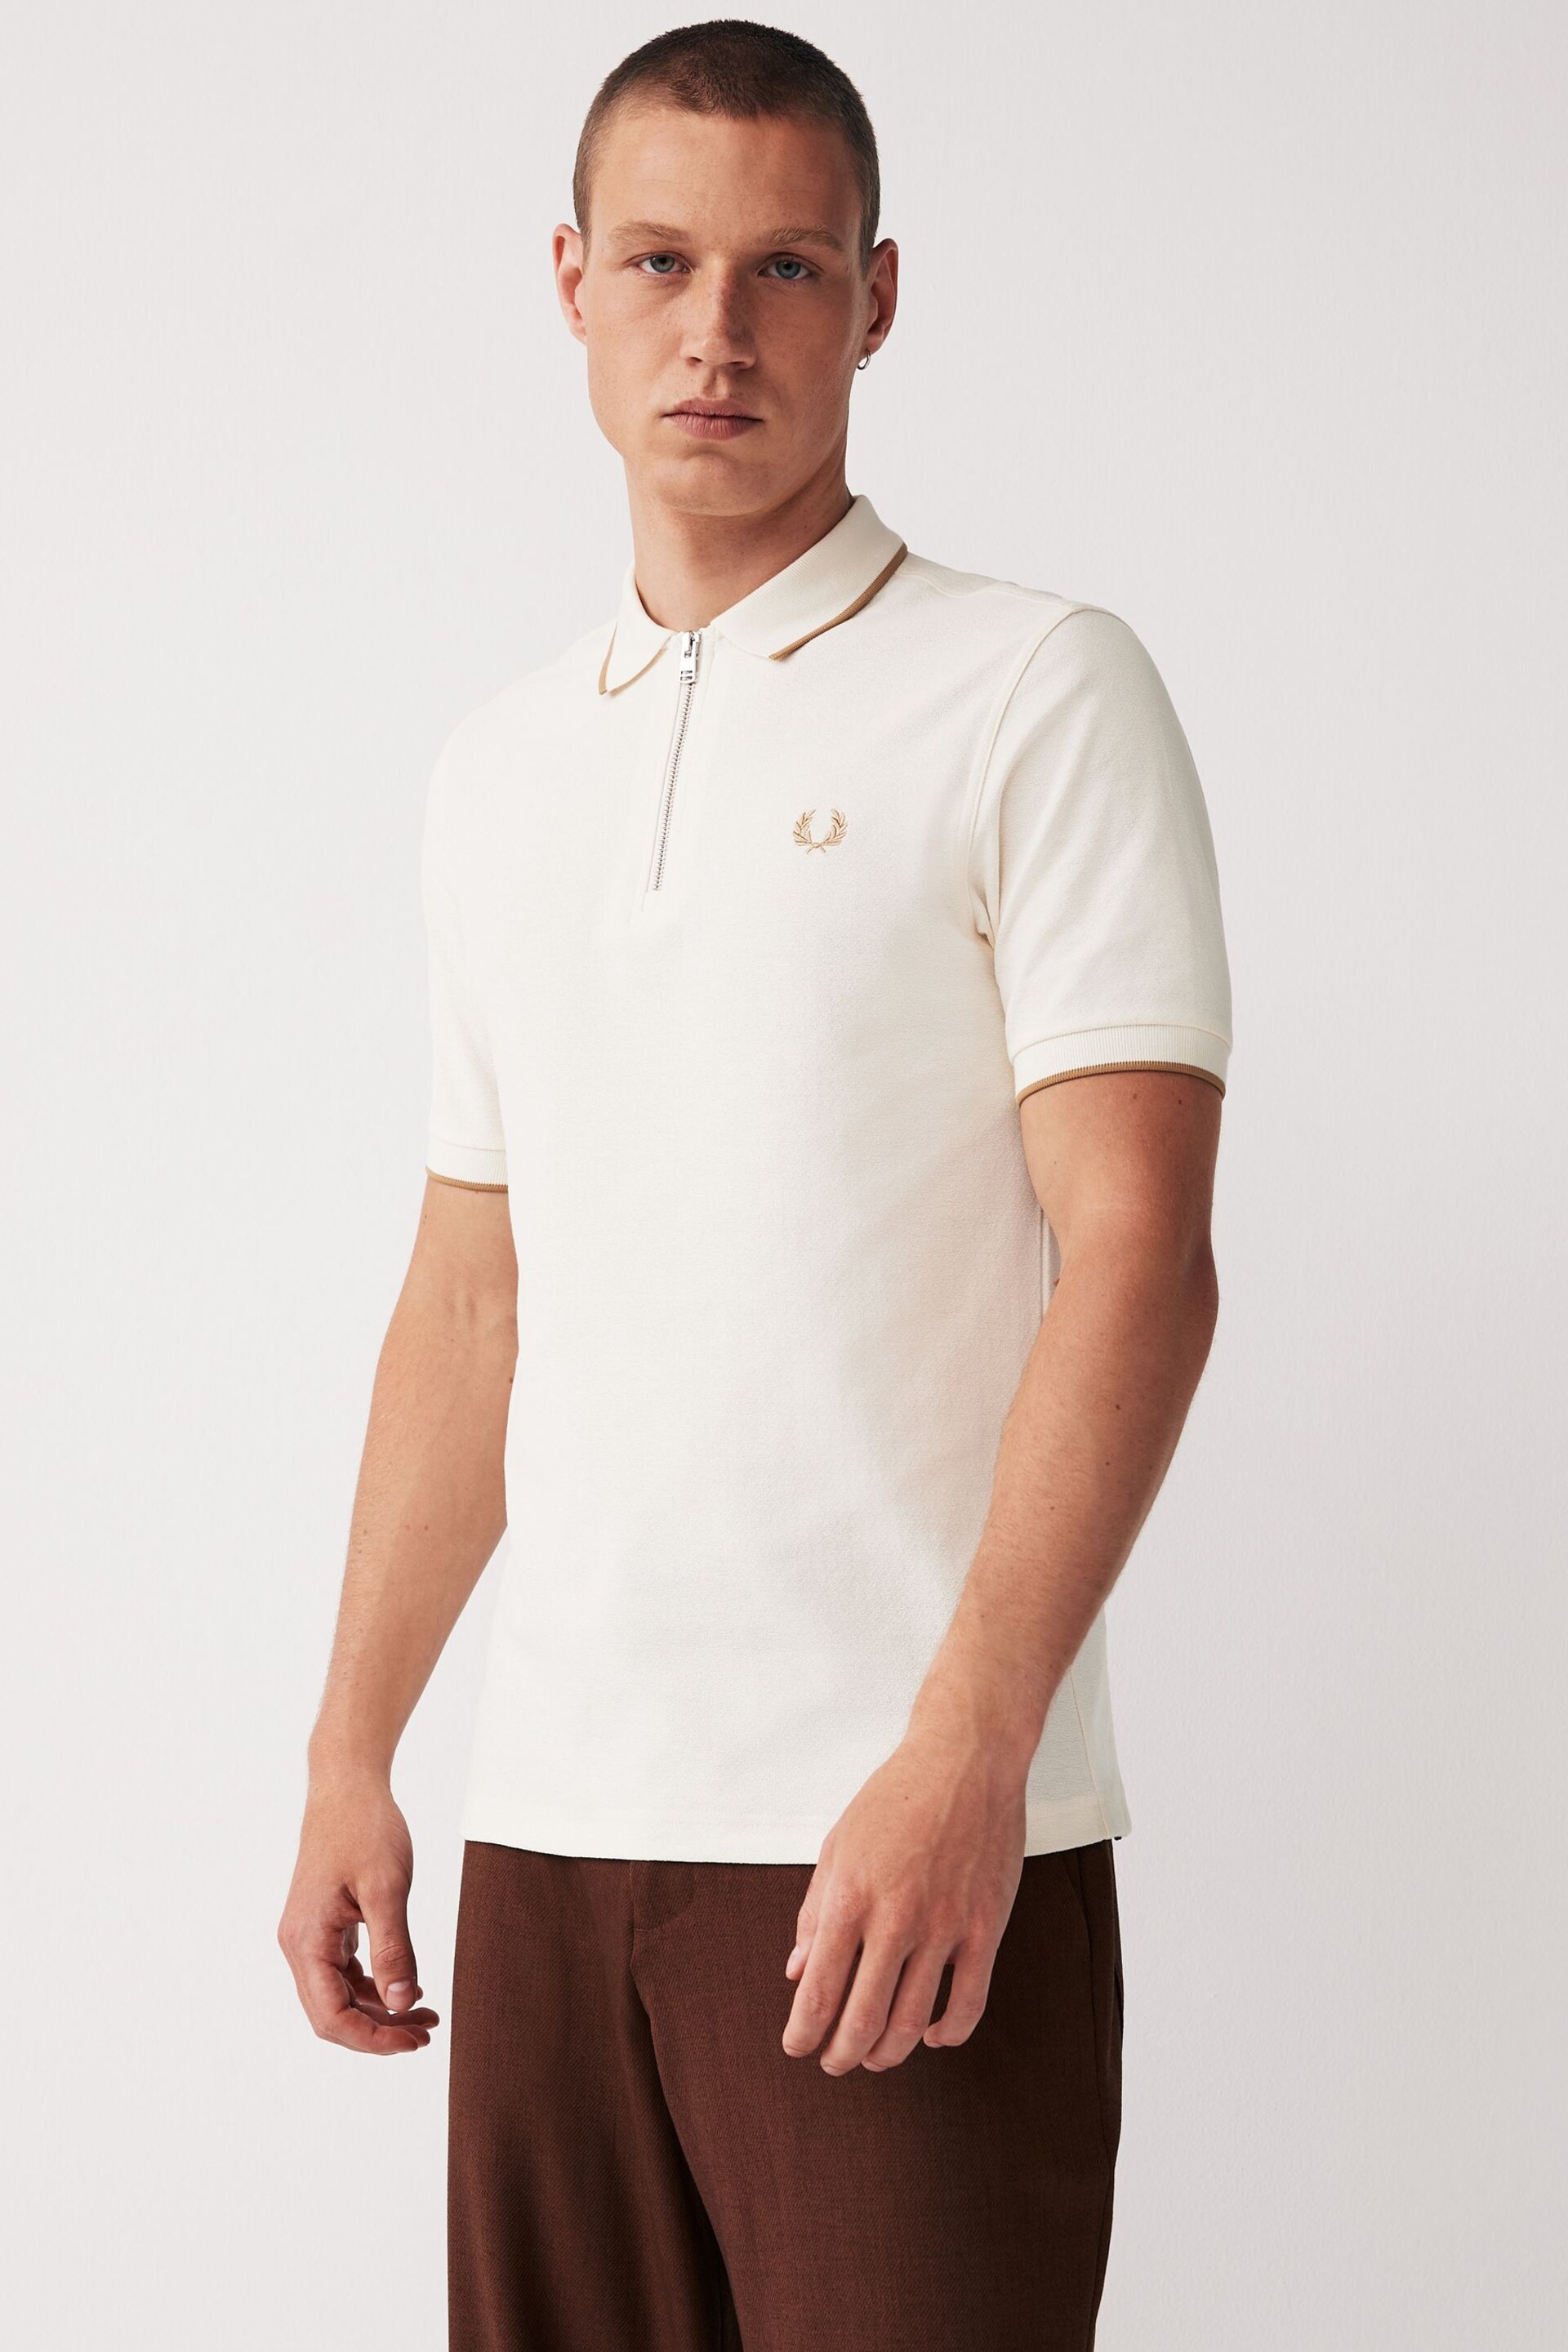 Fred Perry Crepe Pique Zip Neck Polo Shirt - Image 2 of 4